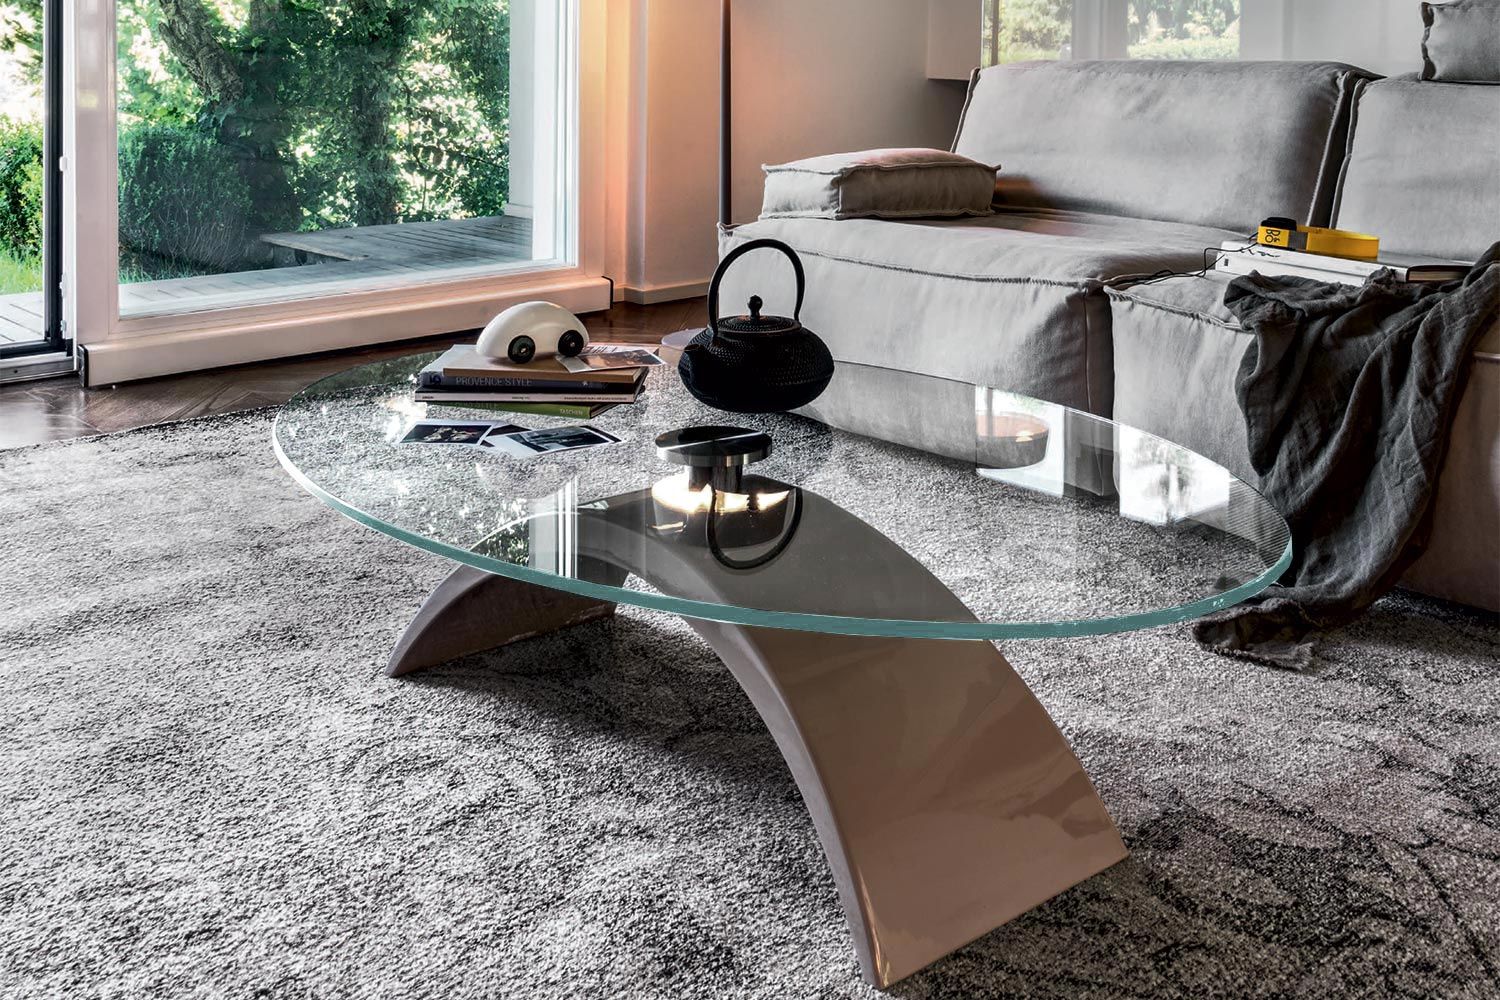 Tudor Oval Coffee Tabletonin Casa • Room Service 360° Within Oval Glass Coffee Tables (View 8 of 15)